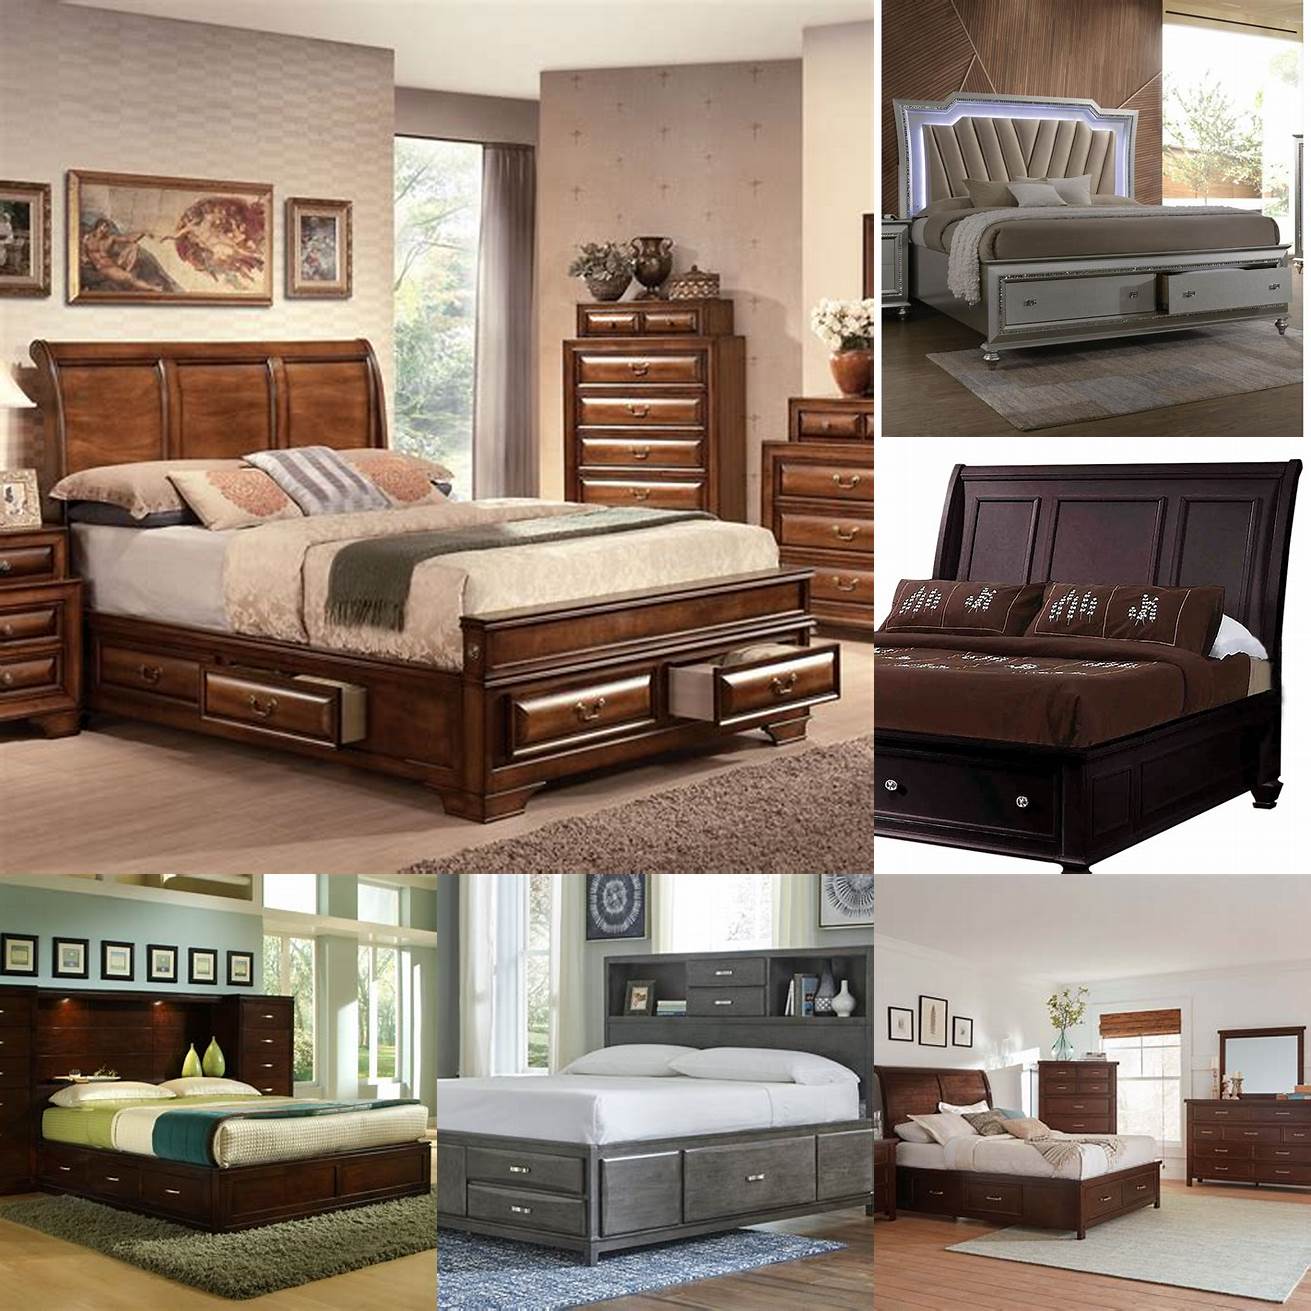 Storage Eastern King Bed - a bed with built-in storage drawers or compartments